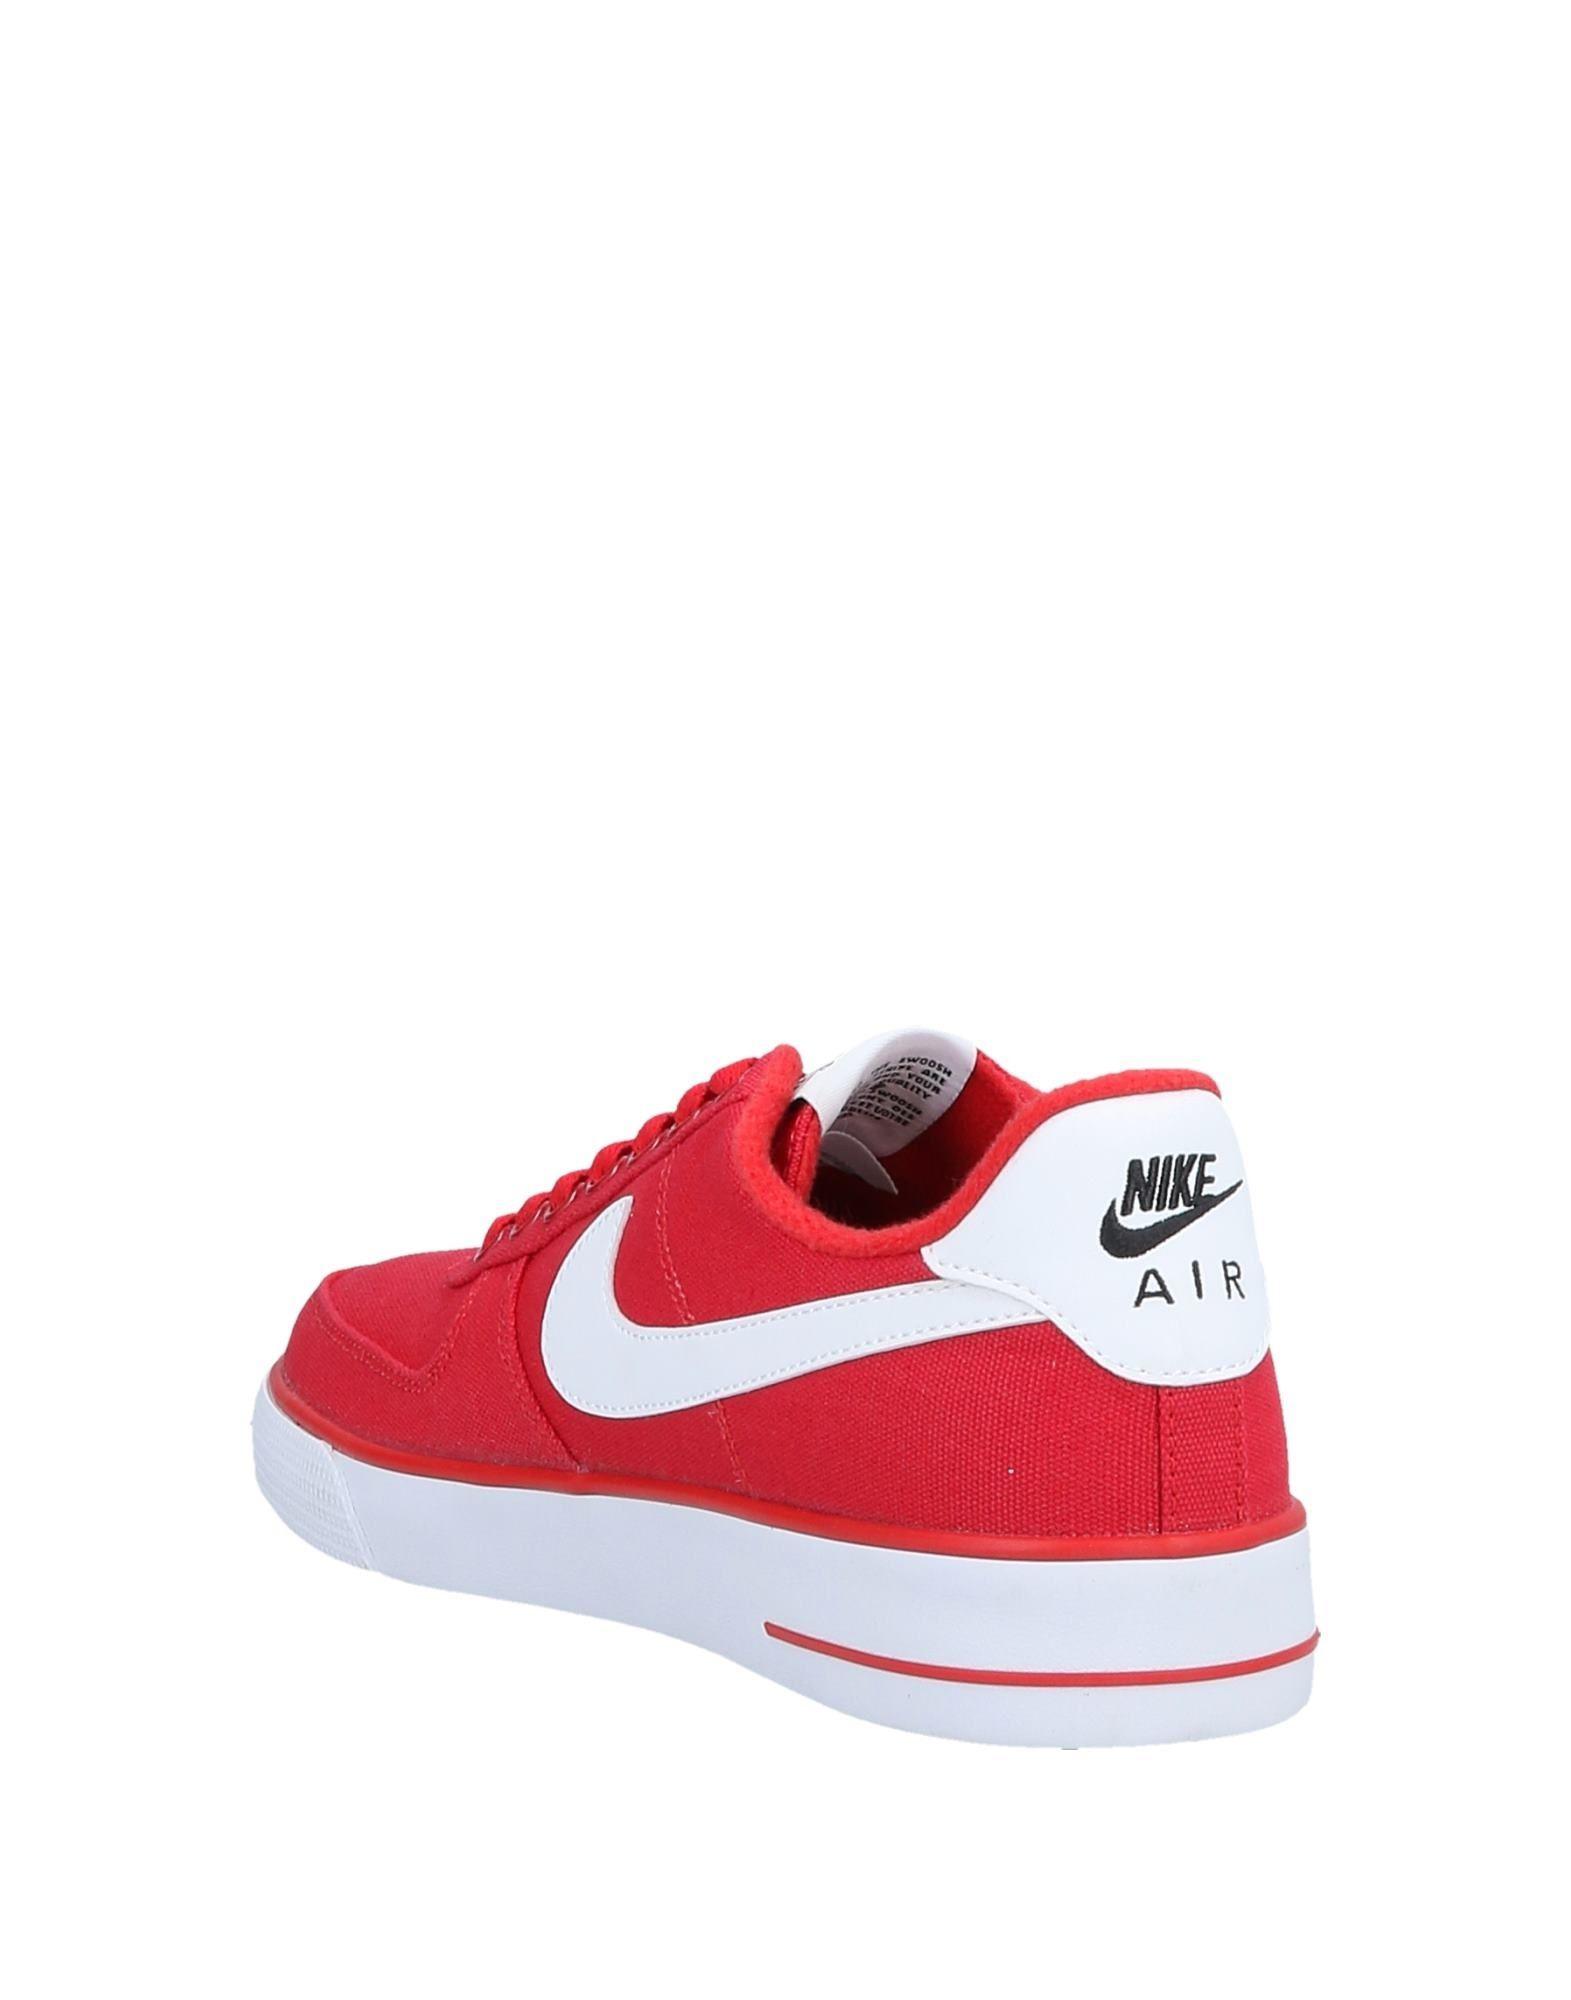 Nike Canvas Low-tops & Sneakers in Red for Men - Lyst